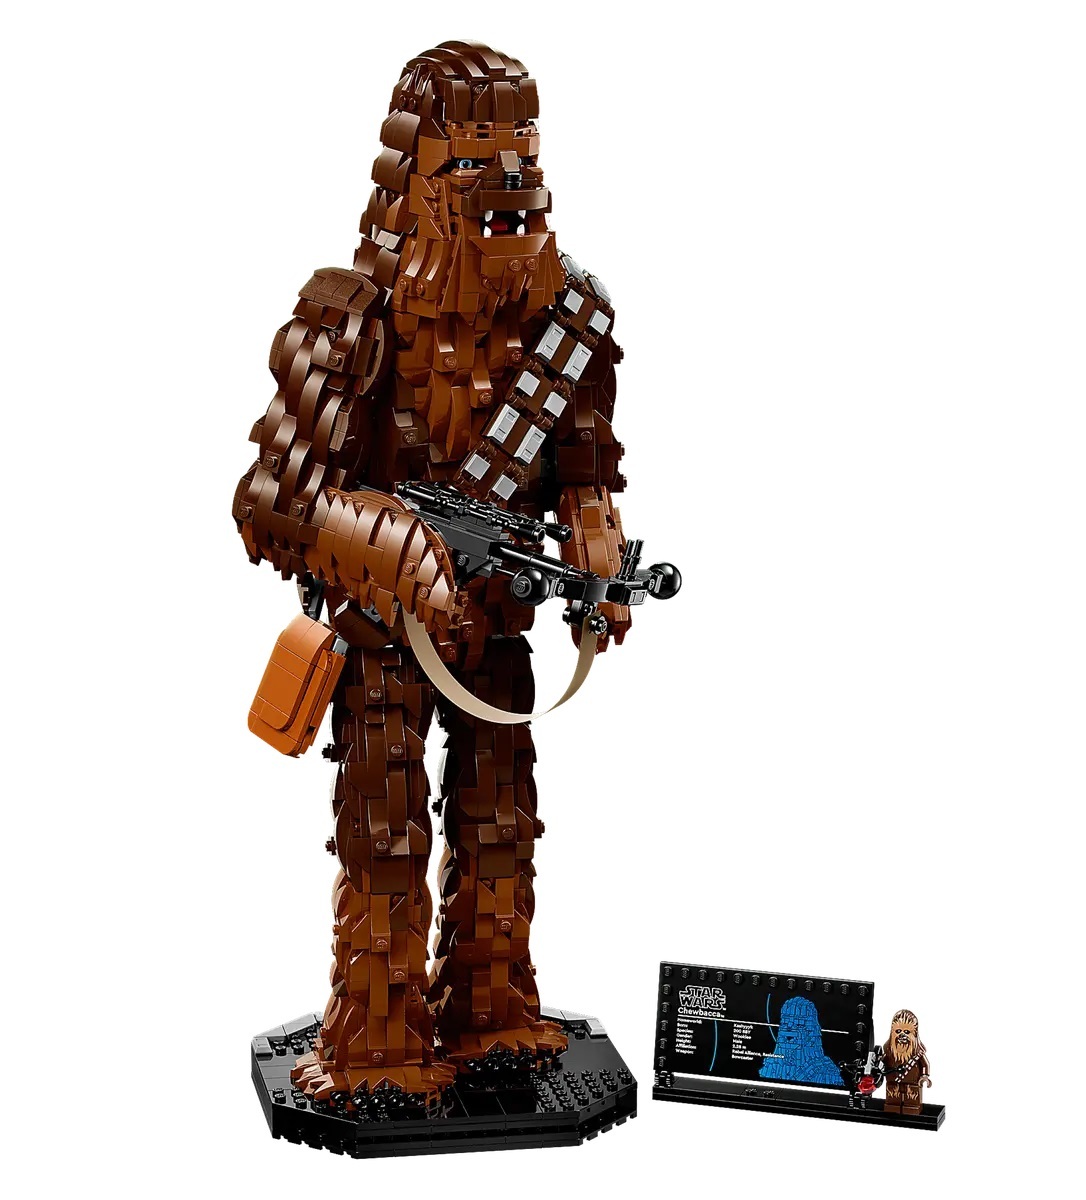 Make Your Own Chewbacca With This 2,319-Brick Lego Star Wars Set